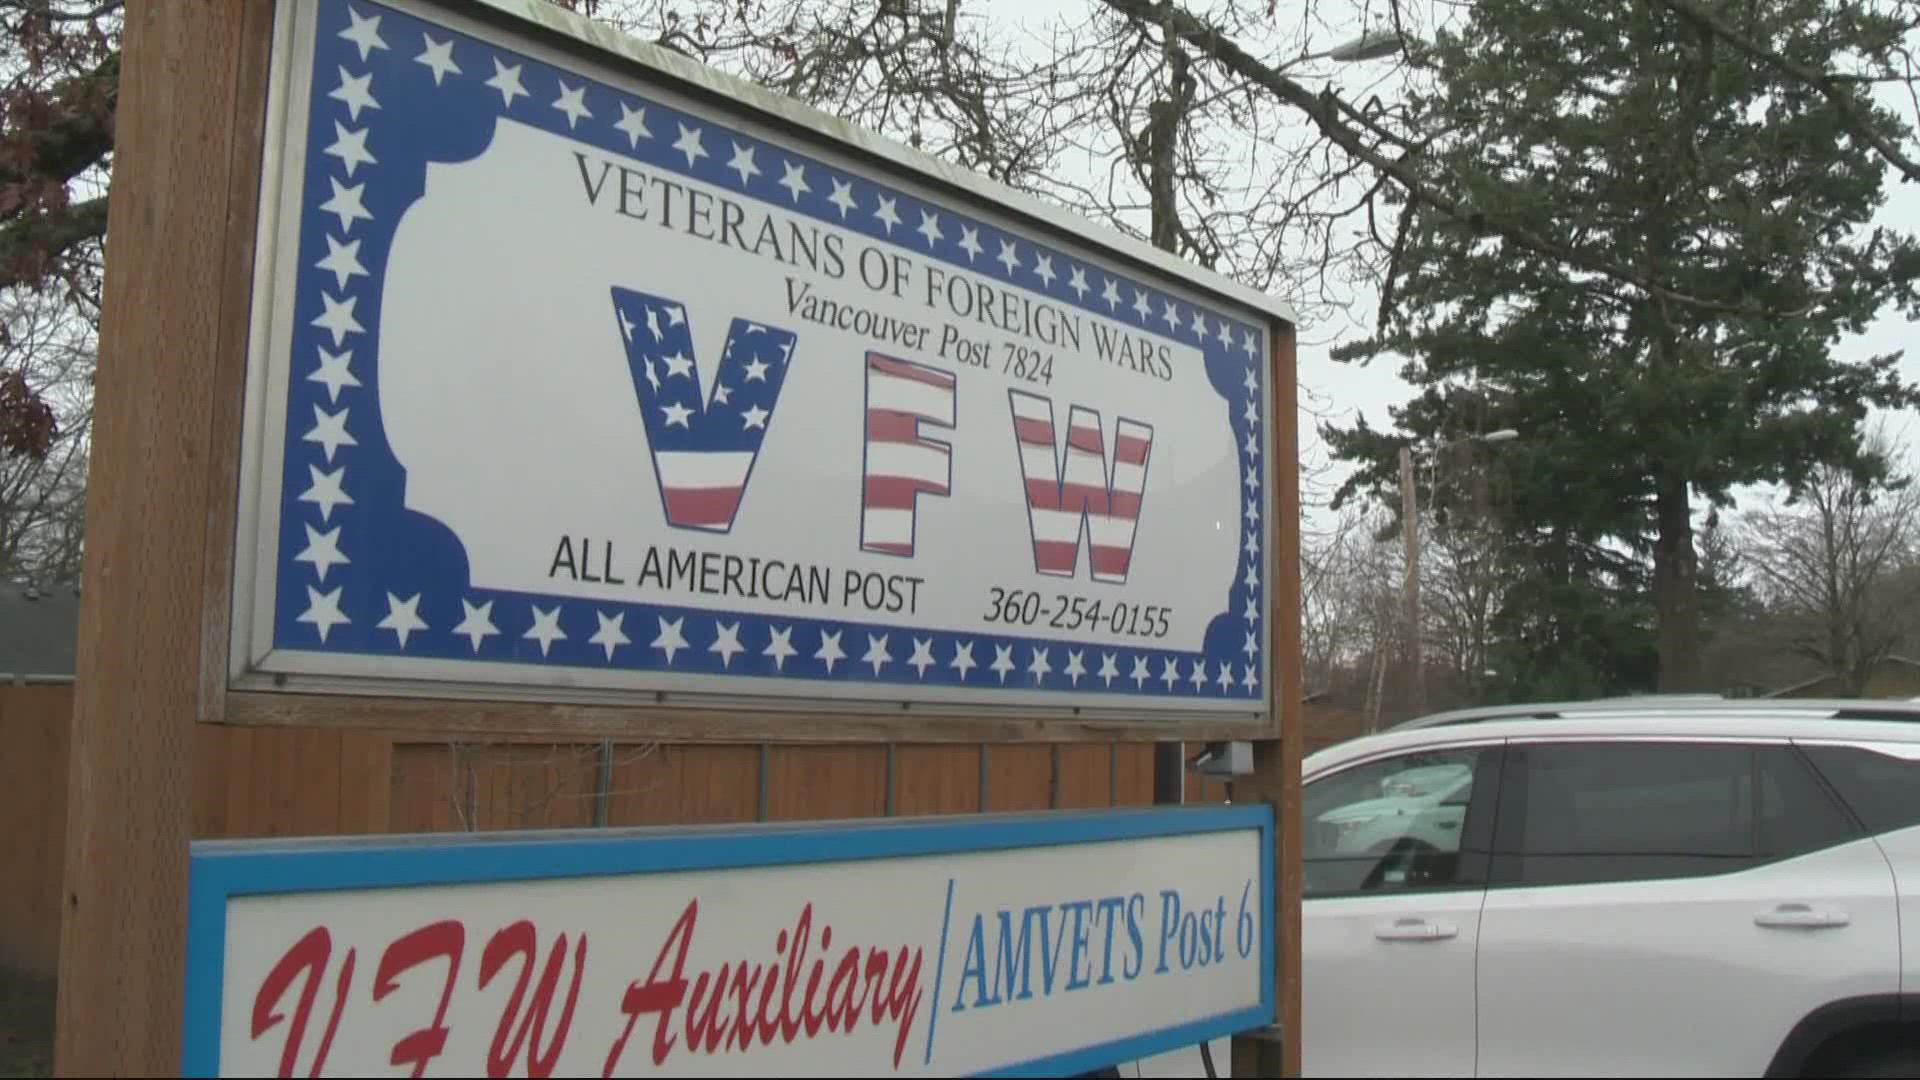 Veterans of Foreign Wars Post 7824 is dedicated to serving U.S. Veterans. It was just recognized as VFW's January Still Serving Post of the Month.